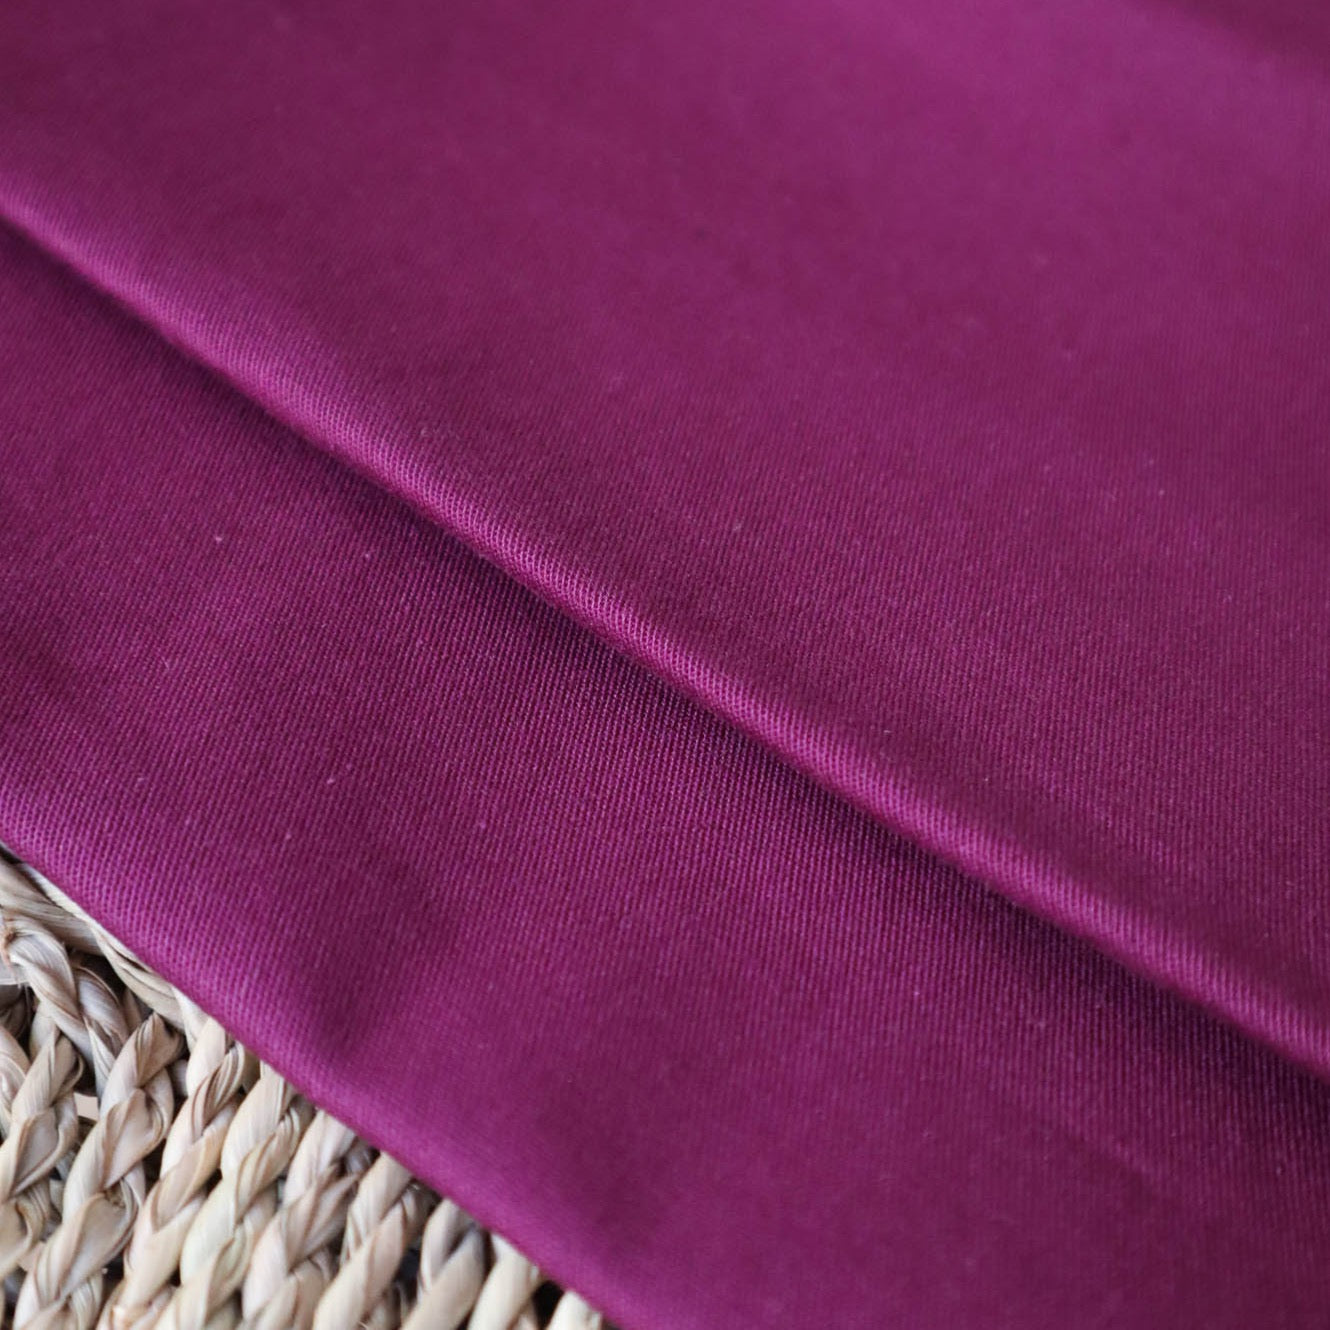 REMNANT 2.02 Metres (Fault - slight pull accross fabric) Lise Tailor - Purple Gabardine Stretch Cotton Fabric